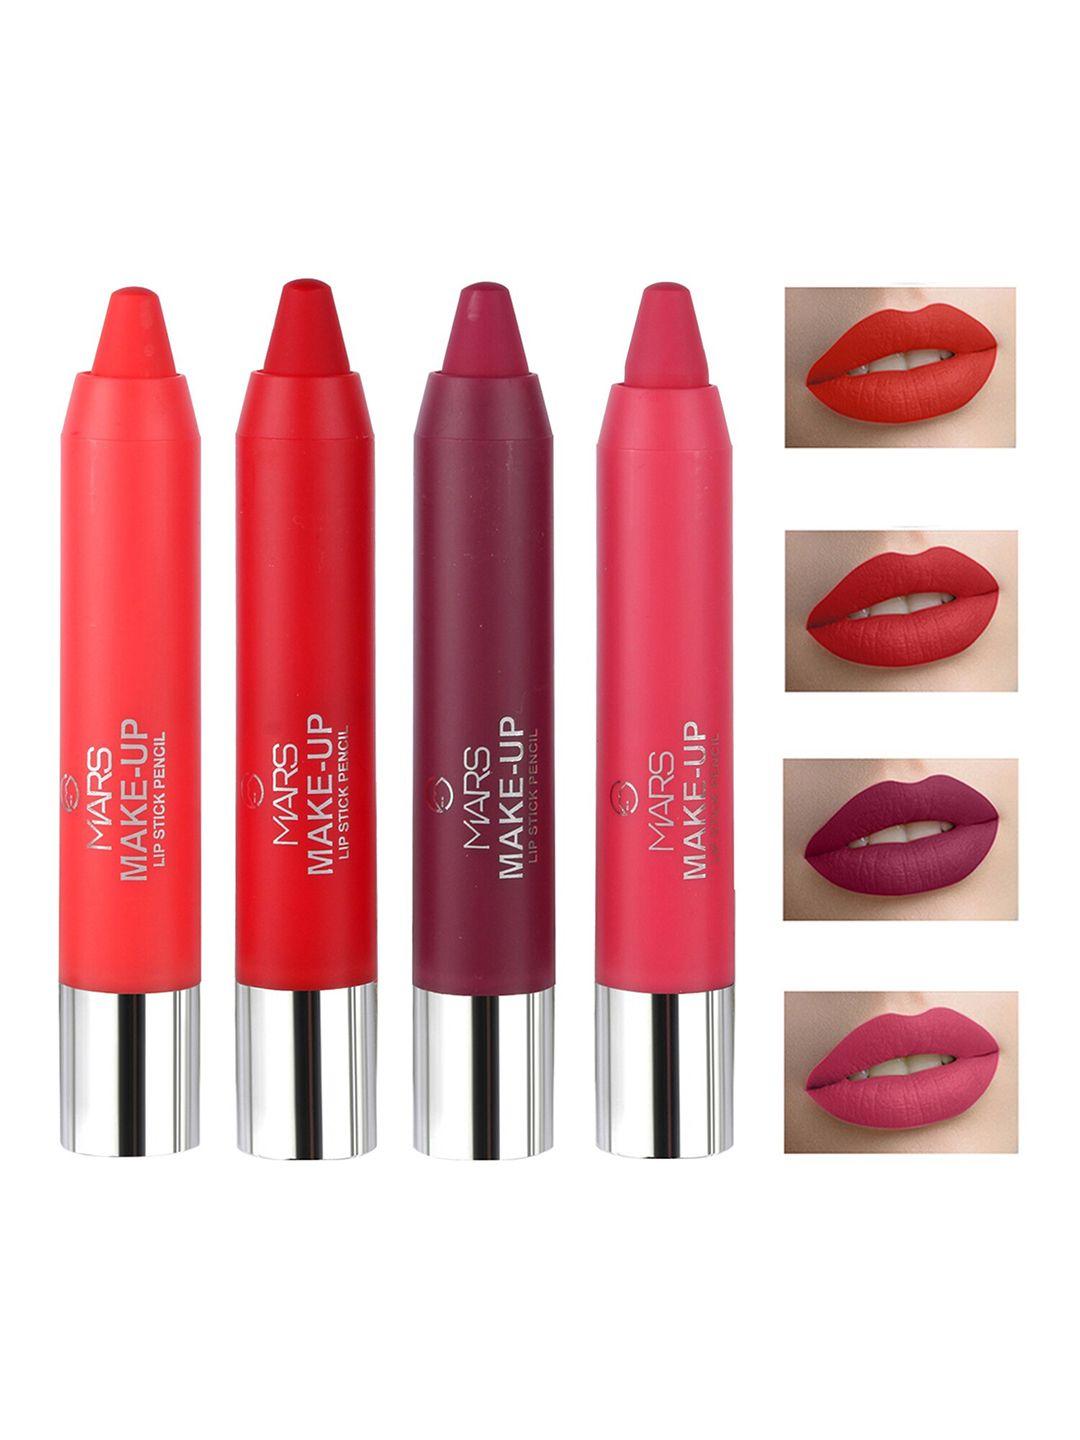 mars makeup set of 4 smooth and pigmented pencil lipstick - 3.6gm each